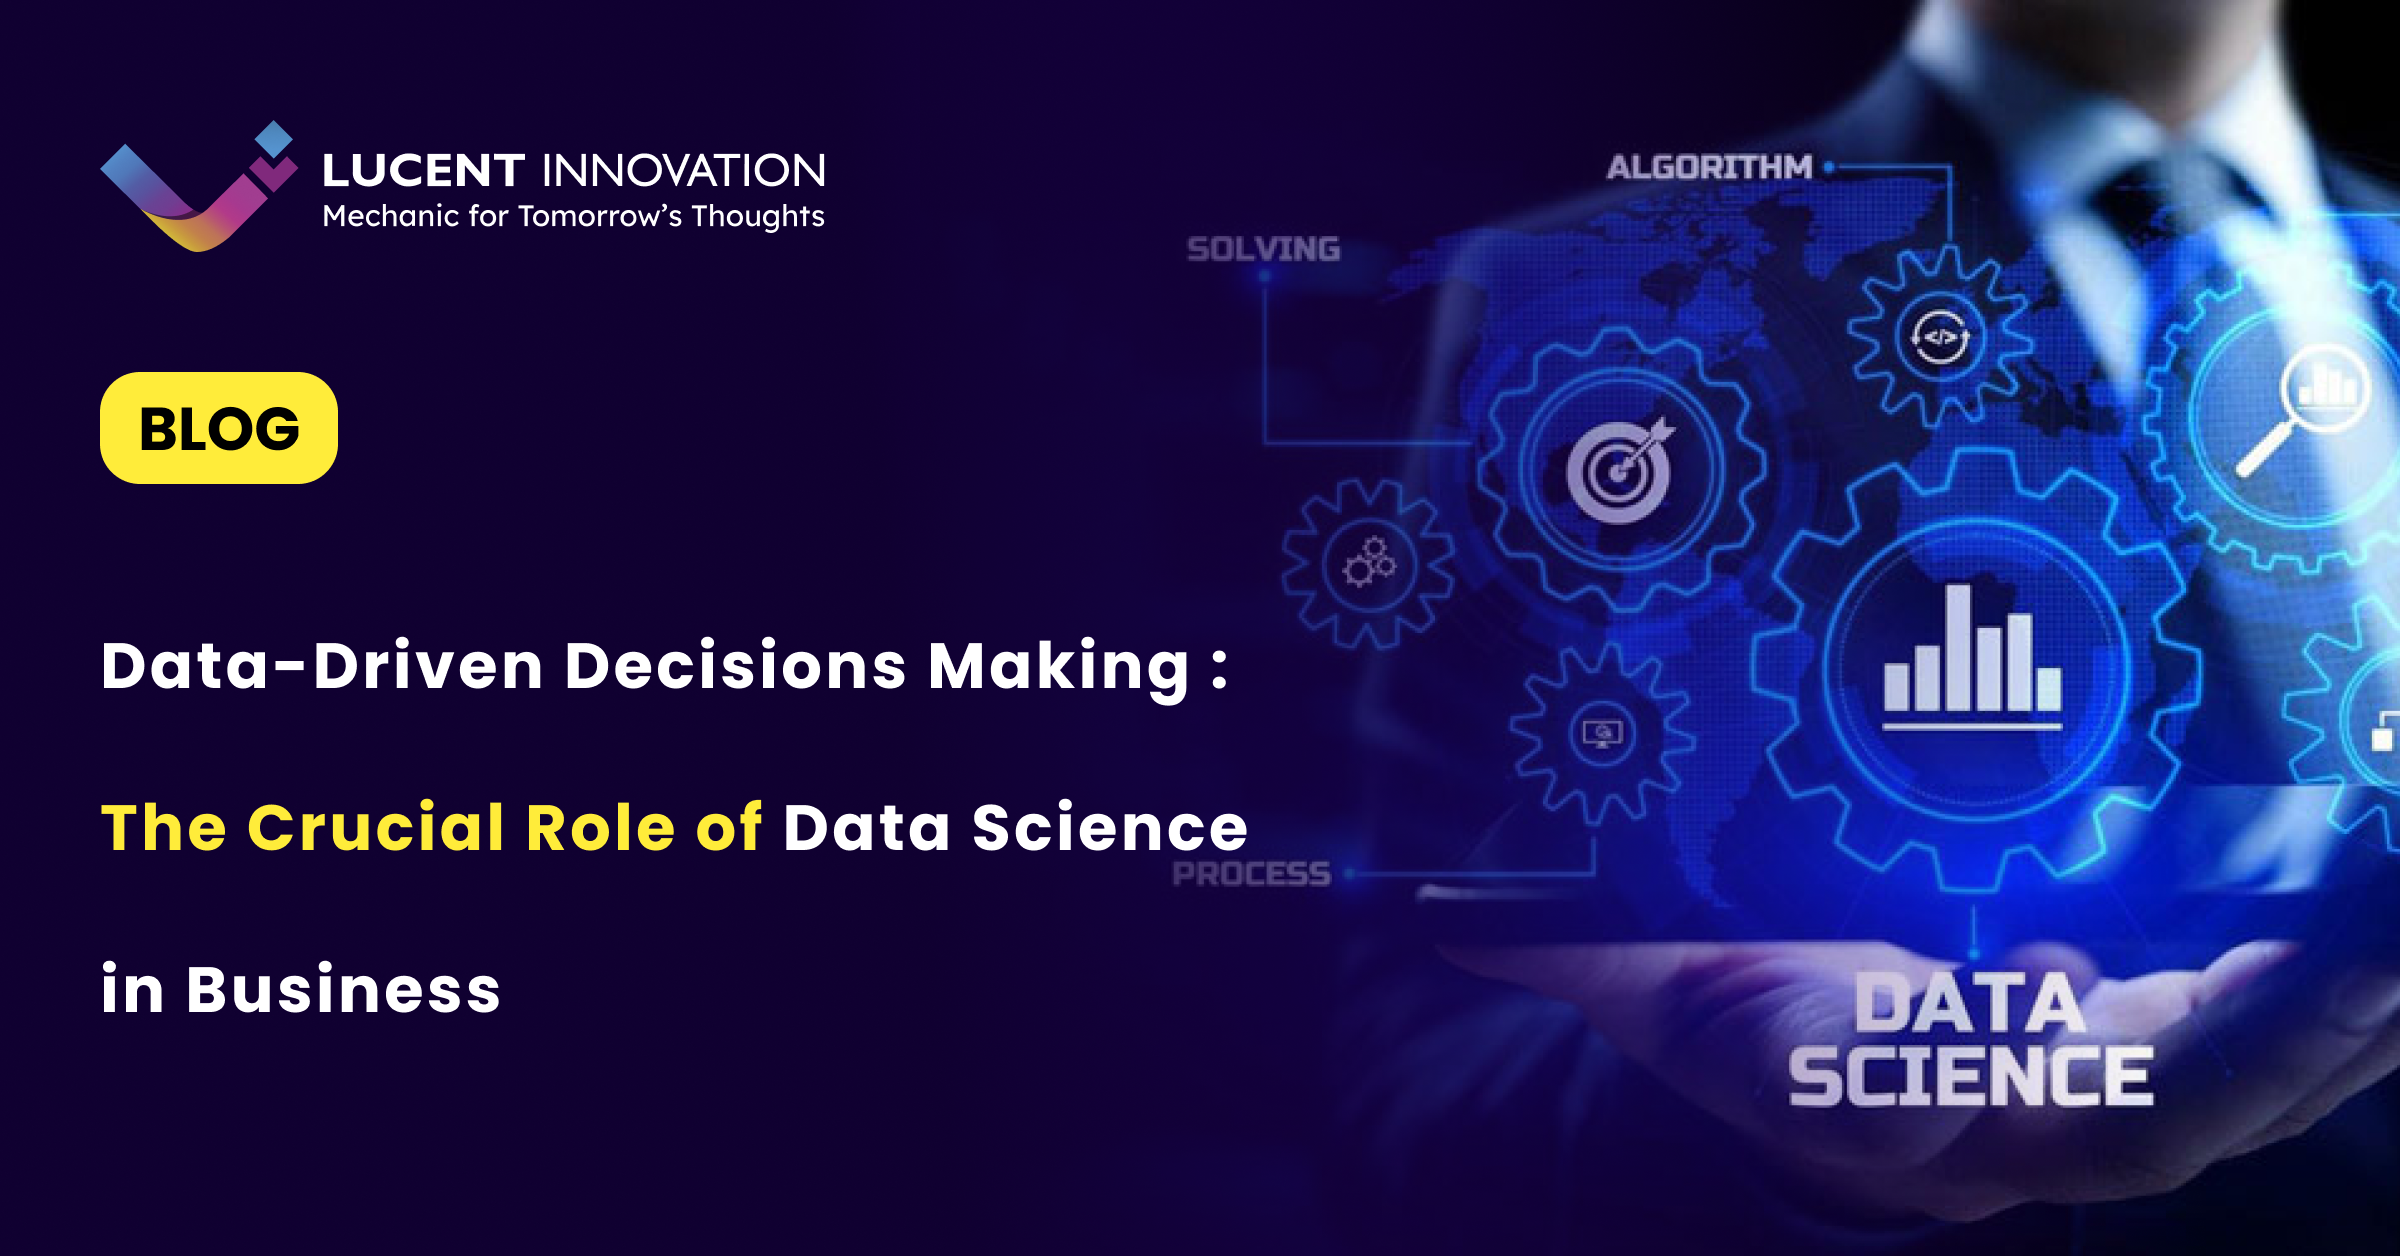 Data-Driven Decisions Making: The Crucial Role of Data Science